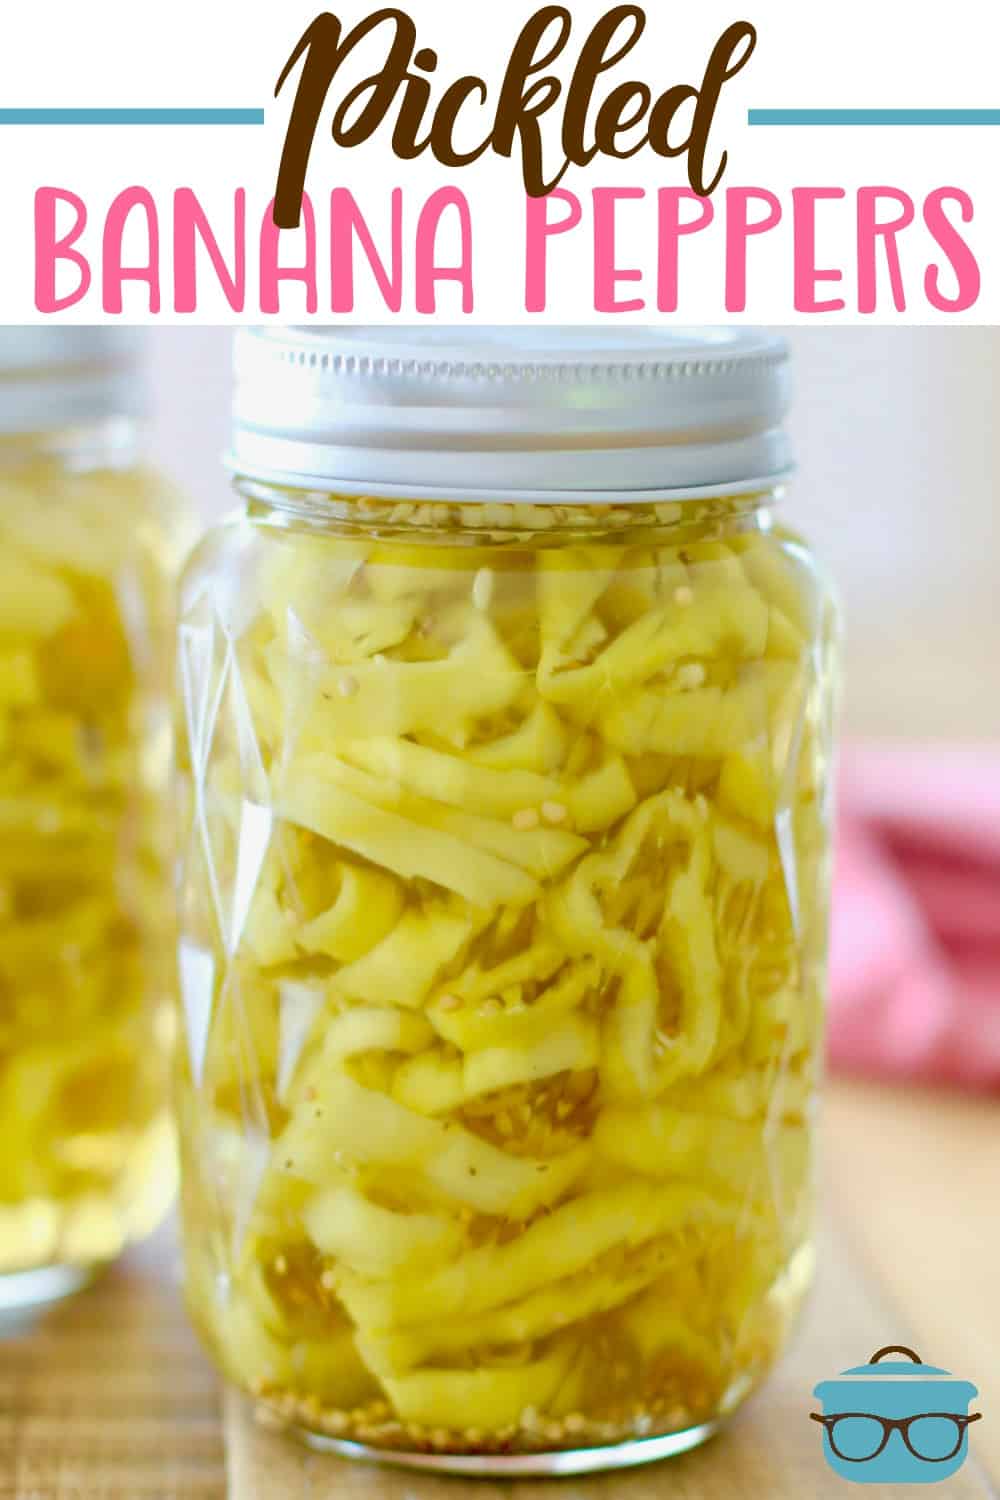 Easy Pickled Banana Peppers recipe from The Country Cook.